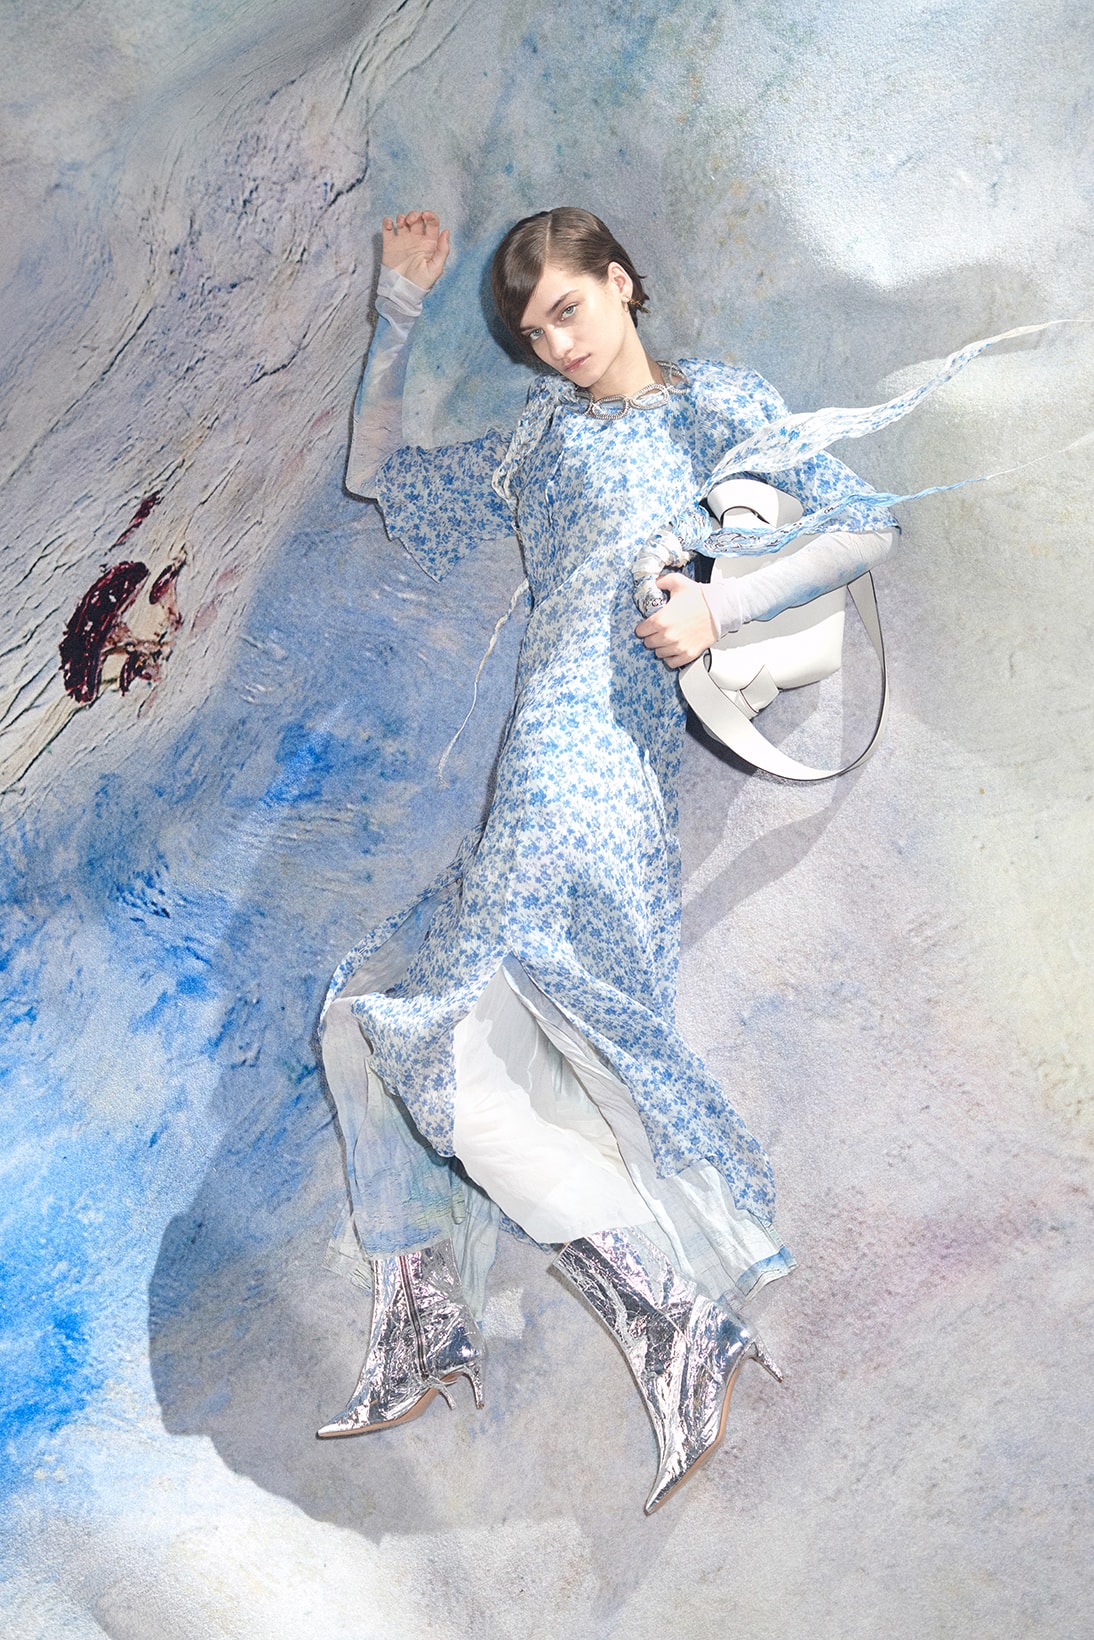 Acne Studios Spring/Summer 2020 Collection Campaign August Strindberg